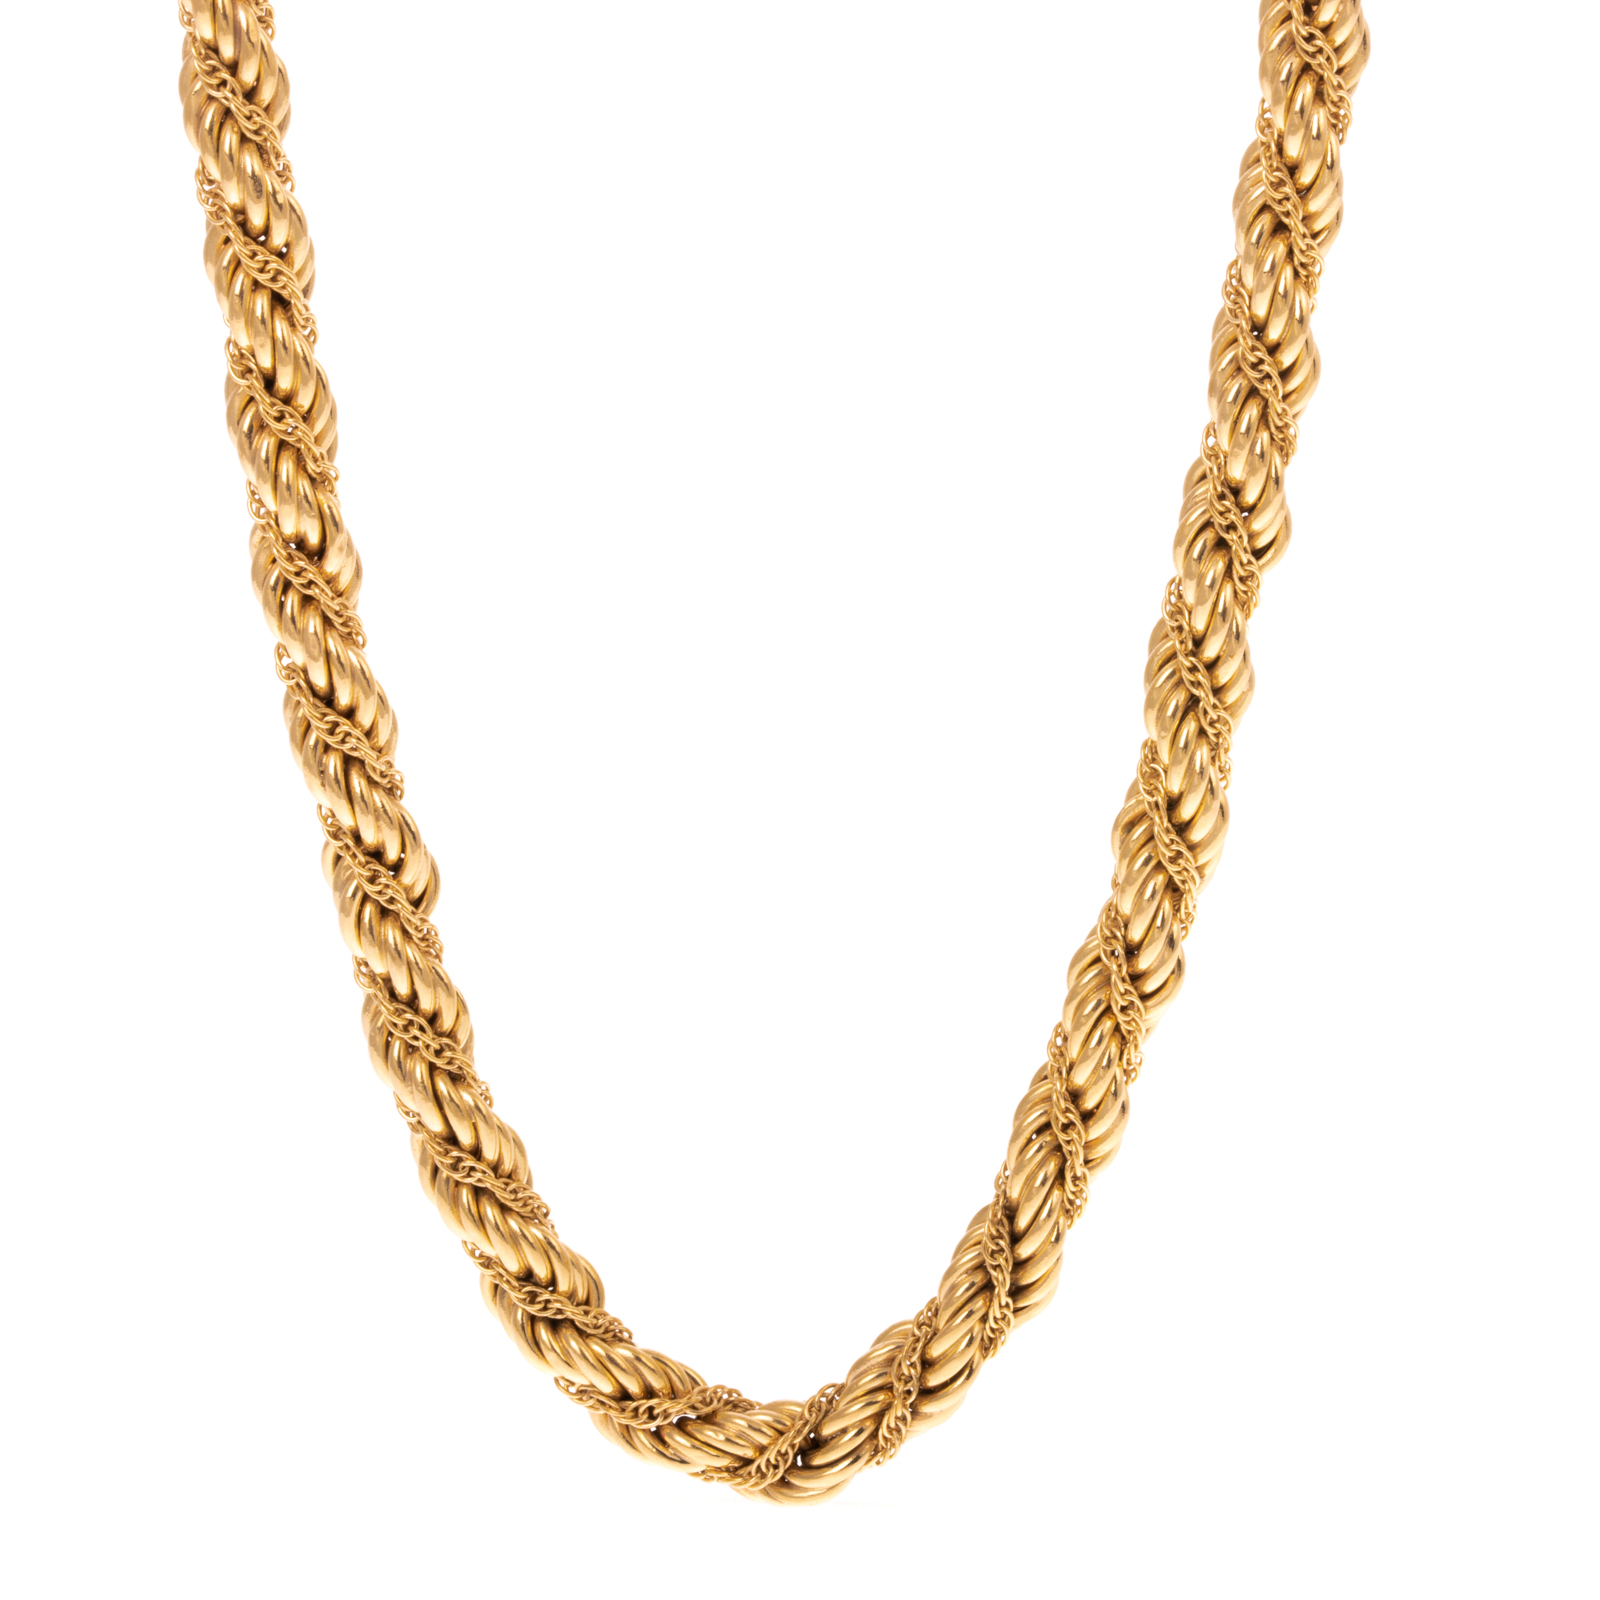 A LONG 14K TWISTED ROPE CHAIN 14K